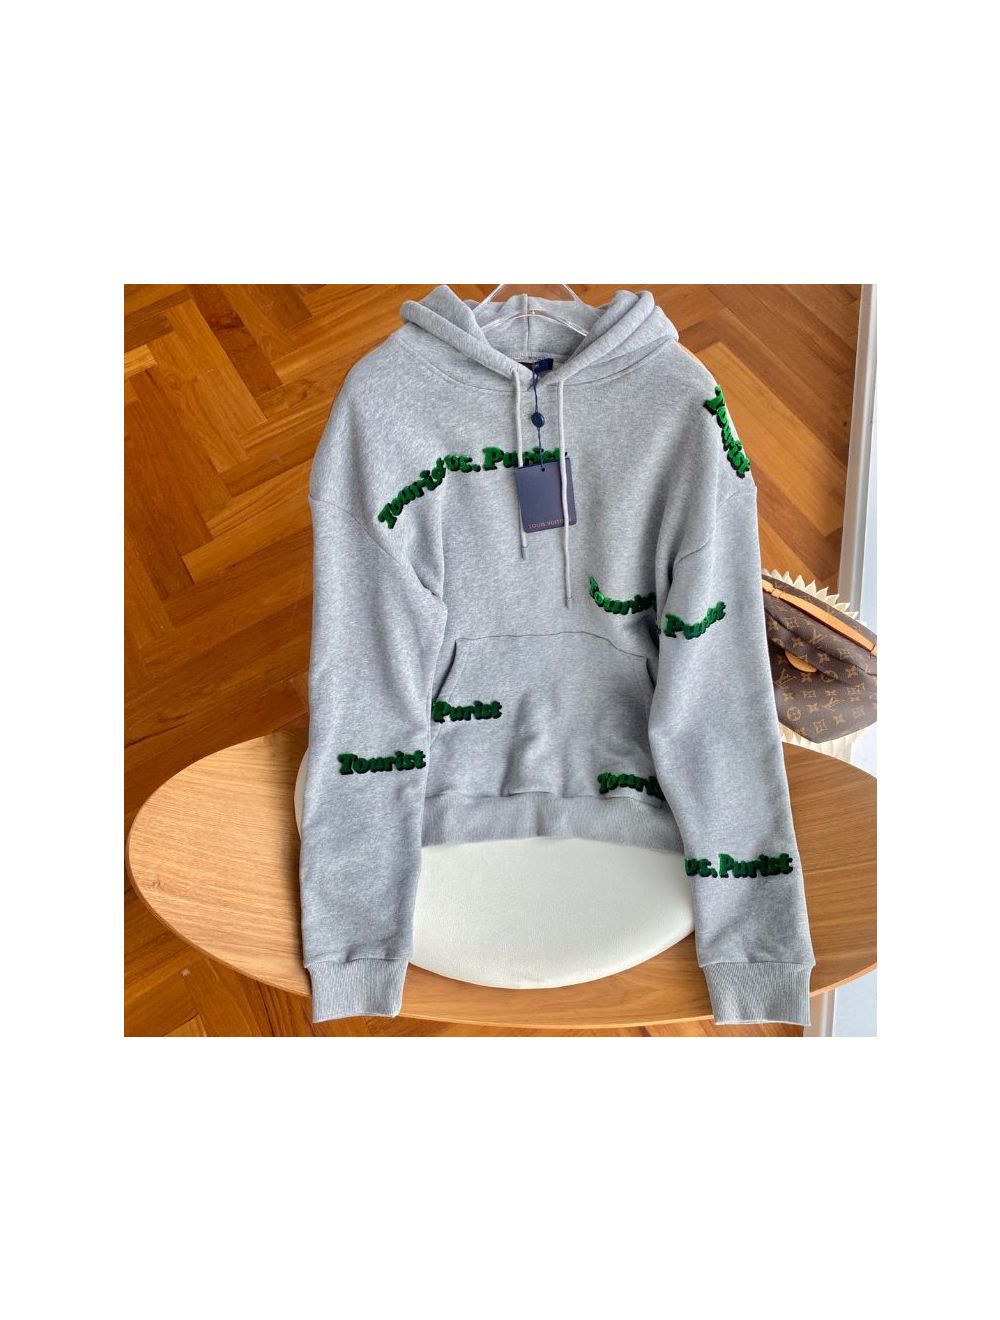 Shop Louis Vuitton Luxury Hoodies (1ABY0T, 1ABY0S, 1ABY0R, 1ABY0Q, 1ABY0P,  1ABY0O, 1ABY0N) by lifeisfun